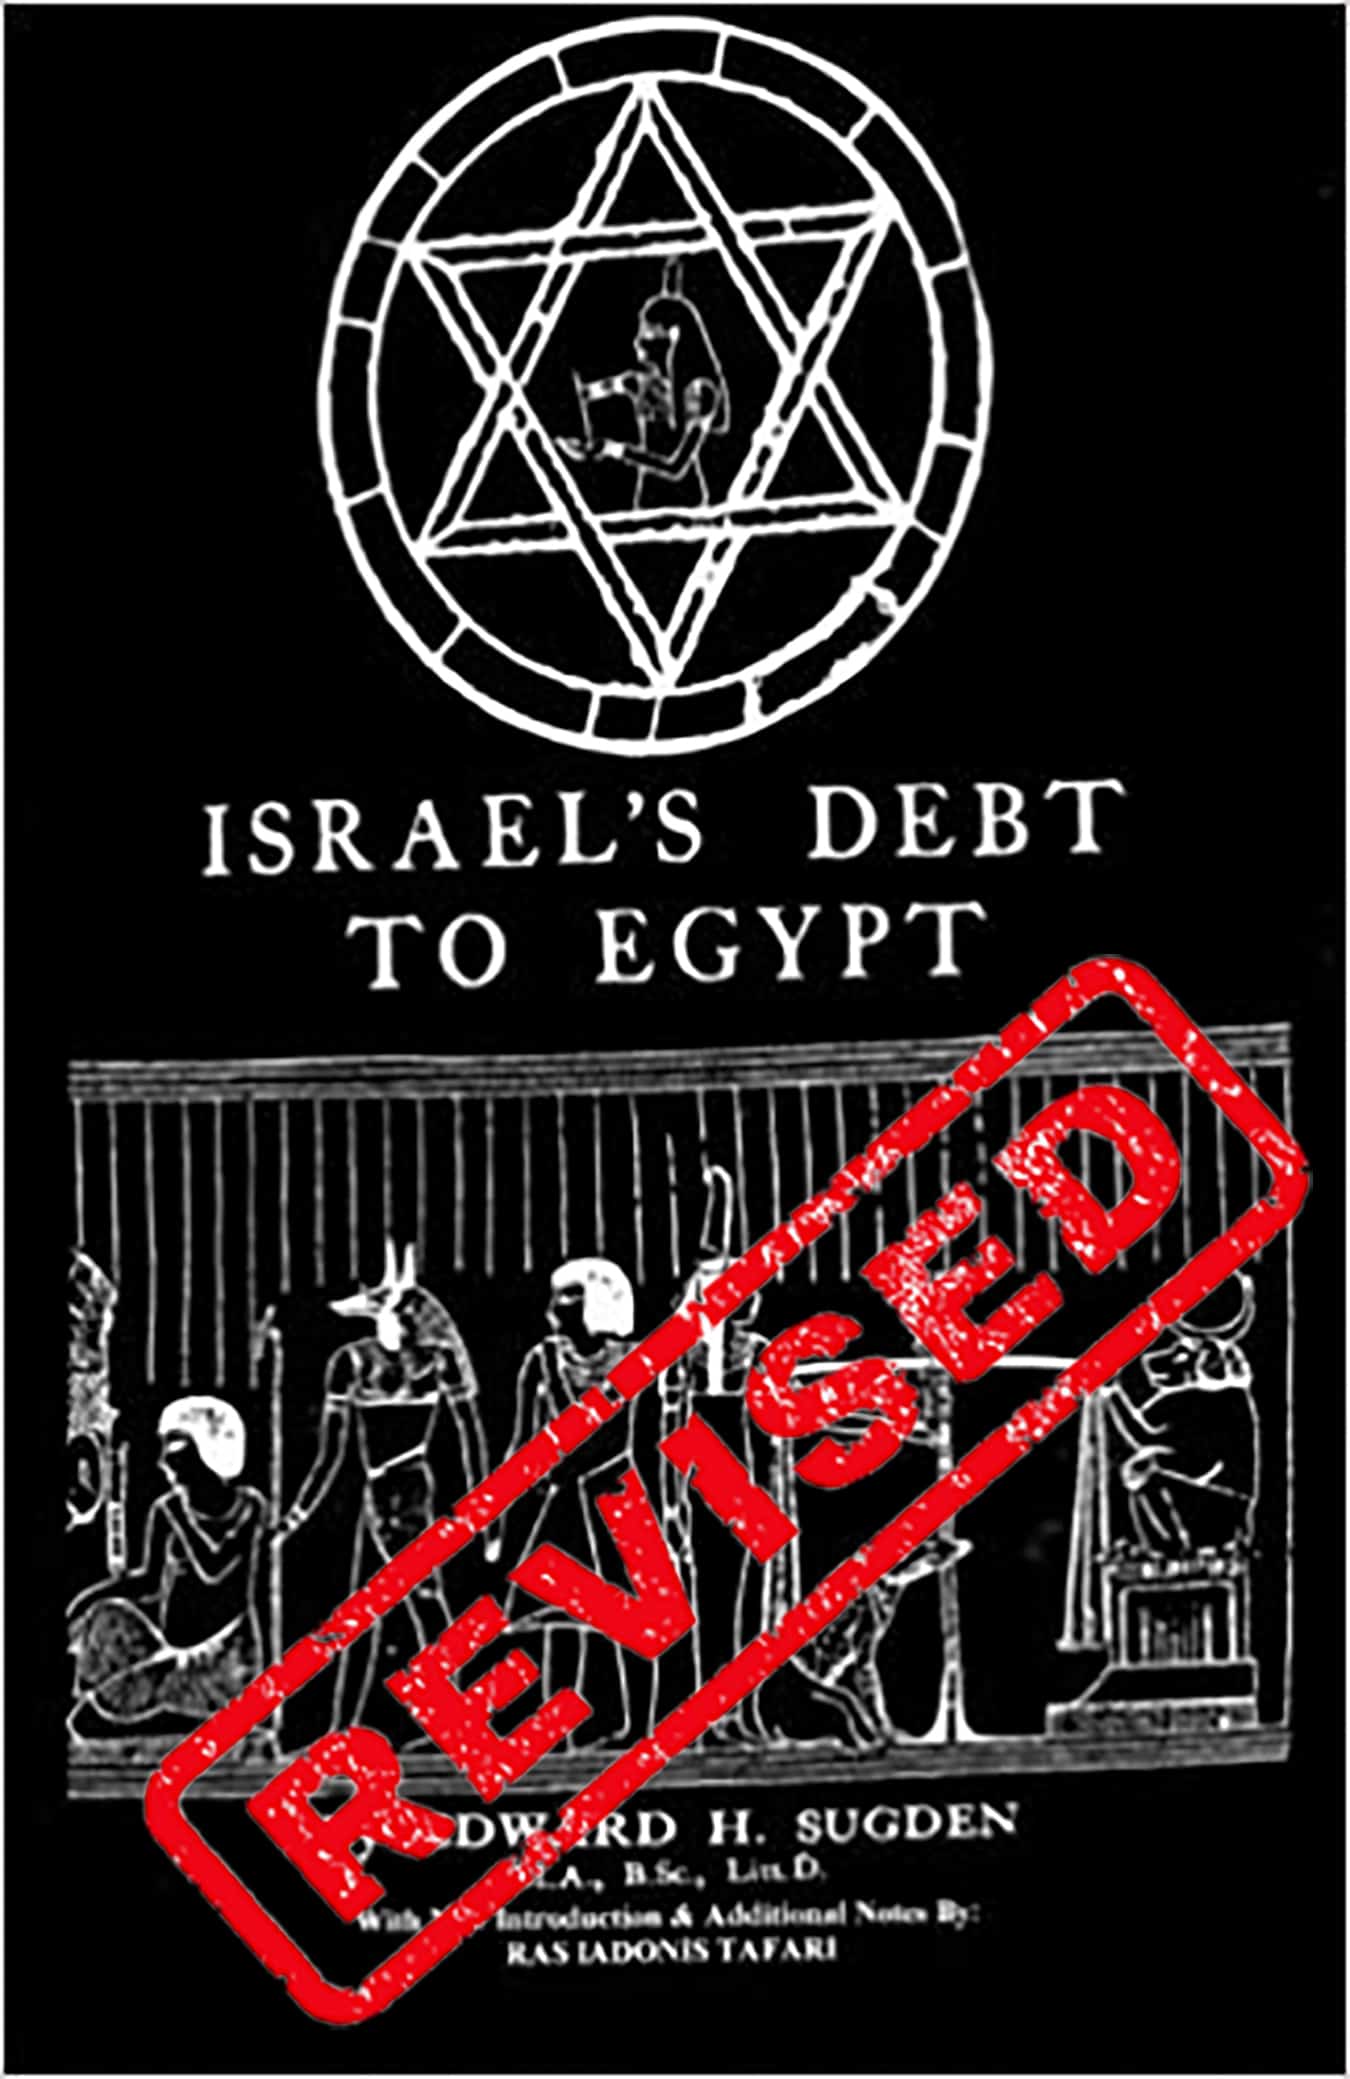 Israel’s Debt To Egypt By Edward H. Sugden